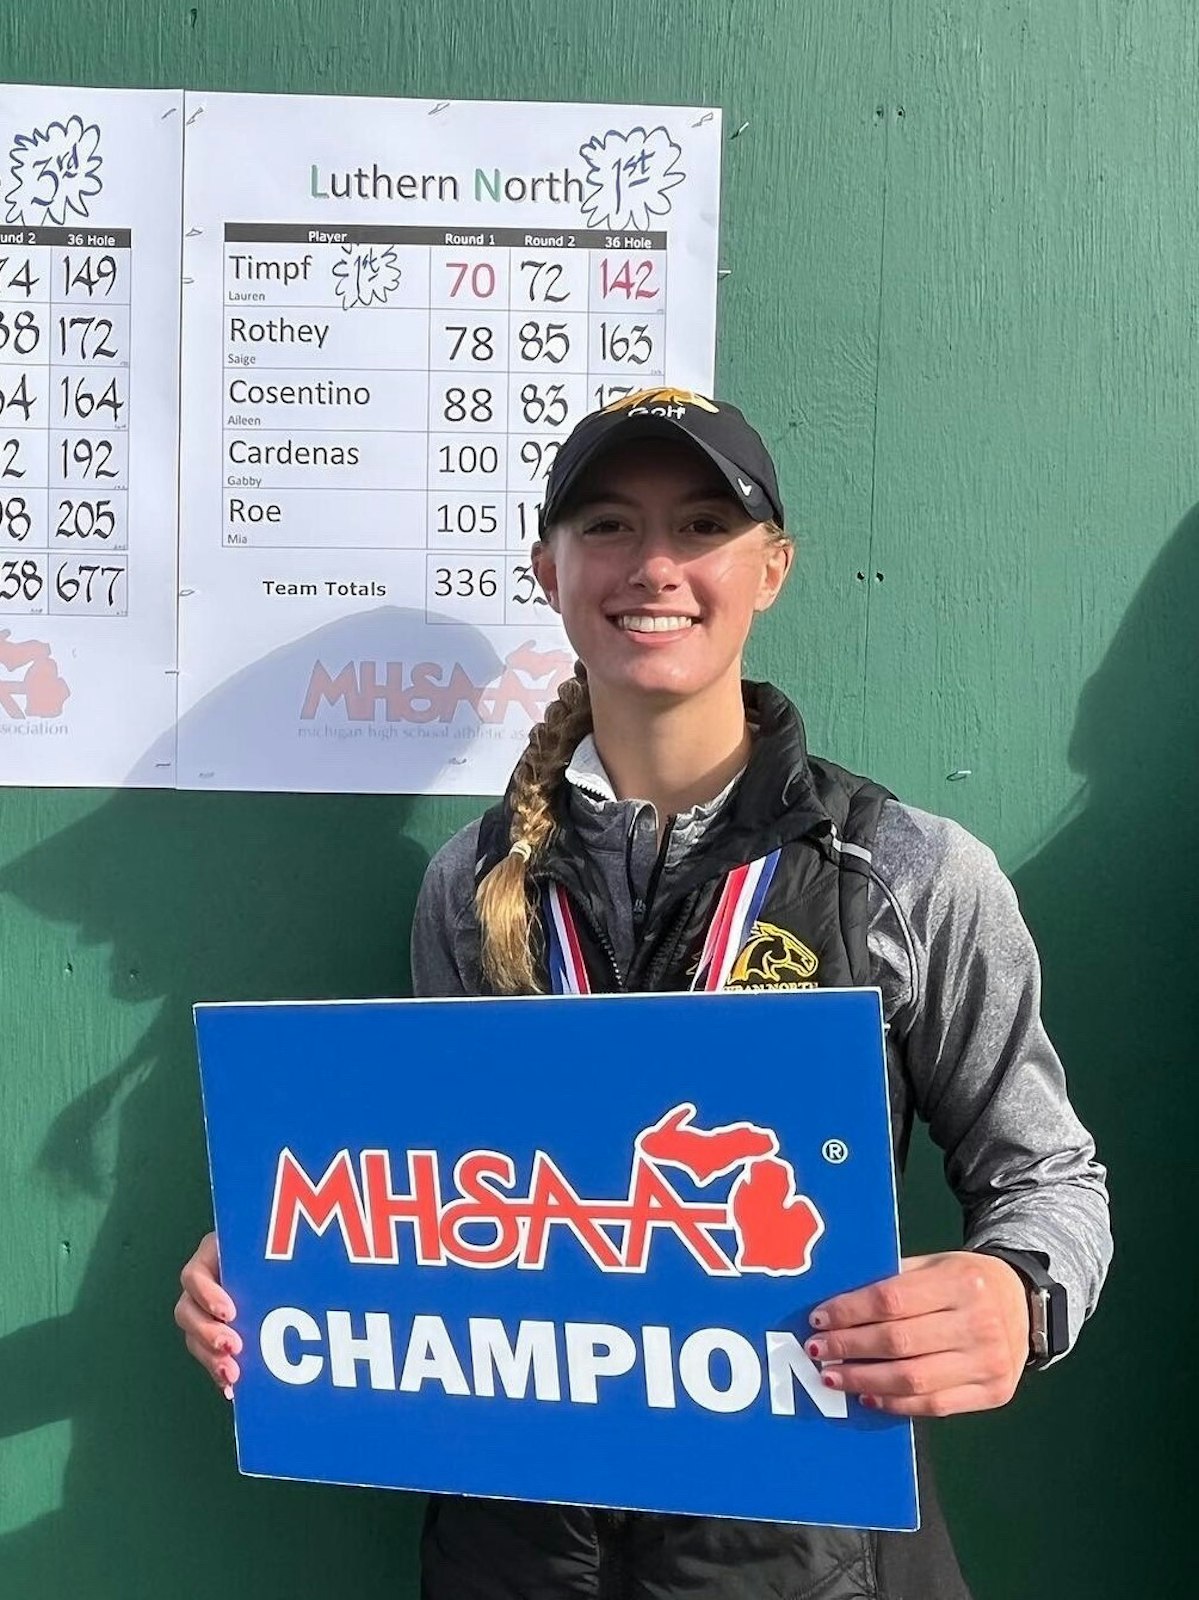 Lutheran North junior Lauren Timpf won the MHSAA Division 3 medalist honors for the second year in a row, shooting 2-under (70-72) 142. Her score was the best among players from 72 schools competing in the MHSAA’s four divisions.